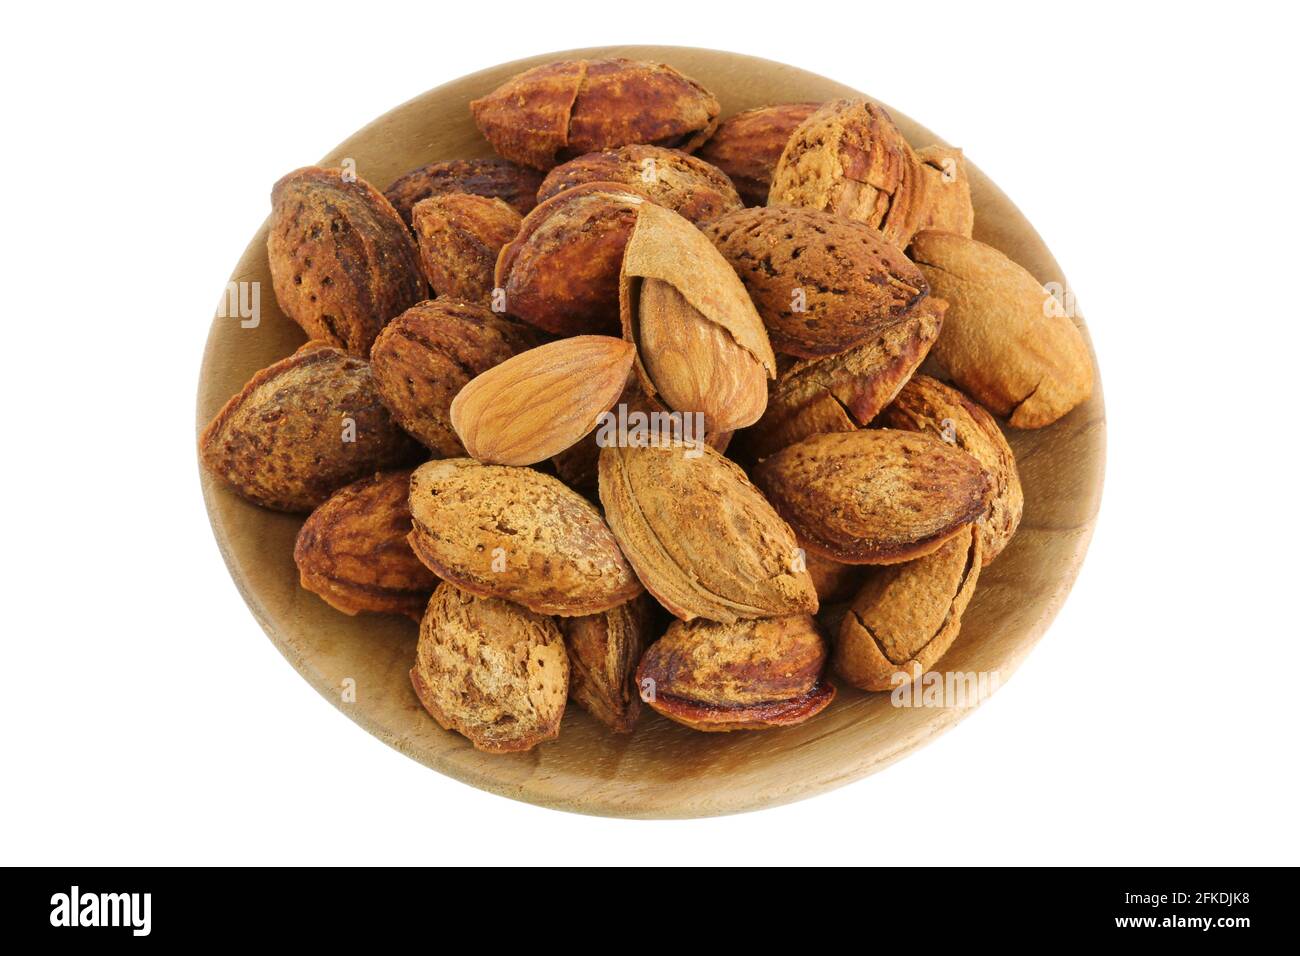 Shelled and unshelled almonds isolated on white background Stock Photo